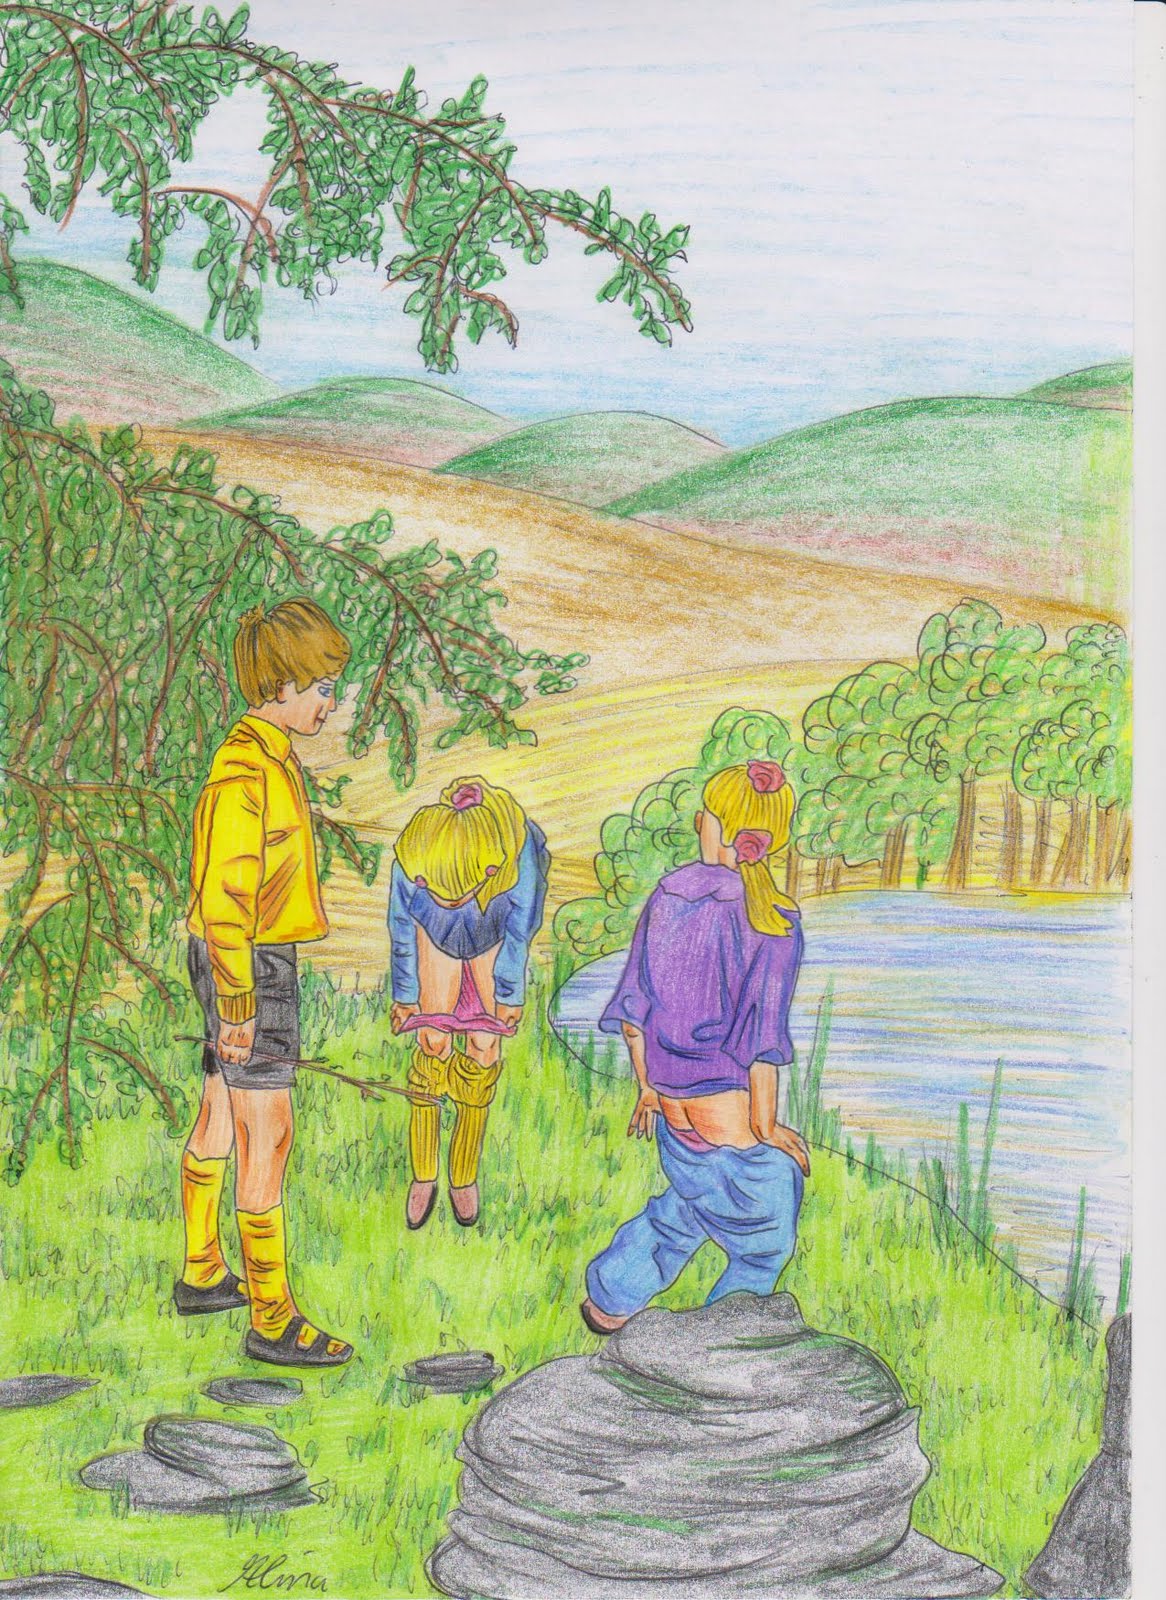 Handprints Spanking Art And Stories Page Drawings Gallery 165 Various Artists